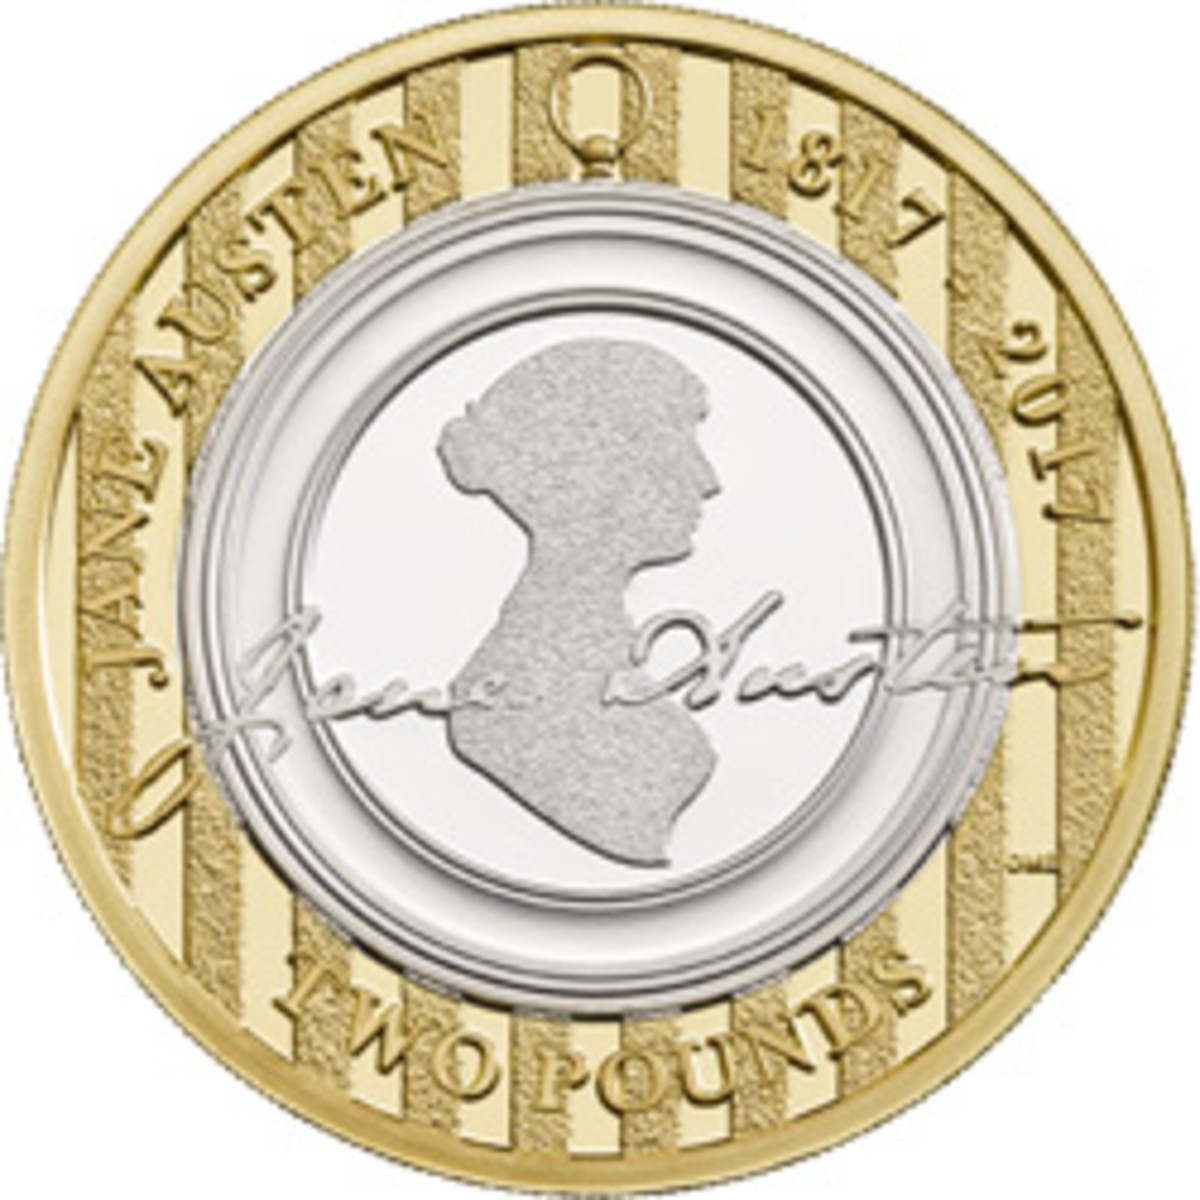  Reverse of Great Britain’s gold plated .917 fine silver Jane Austen commemorative £2 proof. (Image courtesy & © The Royal Mint)